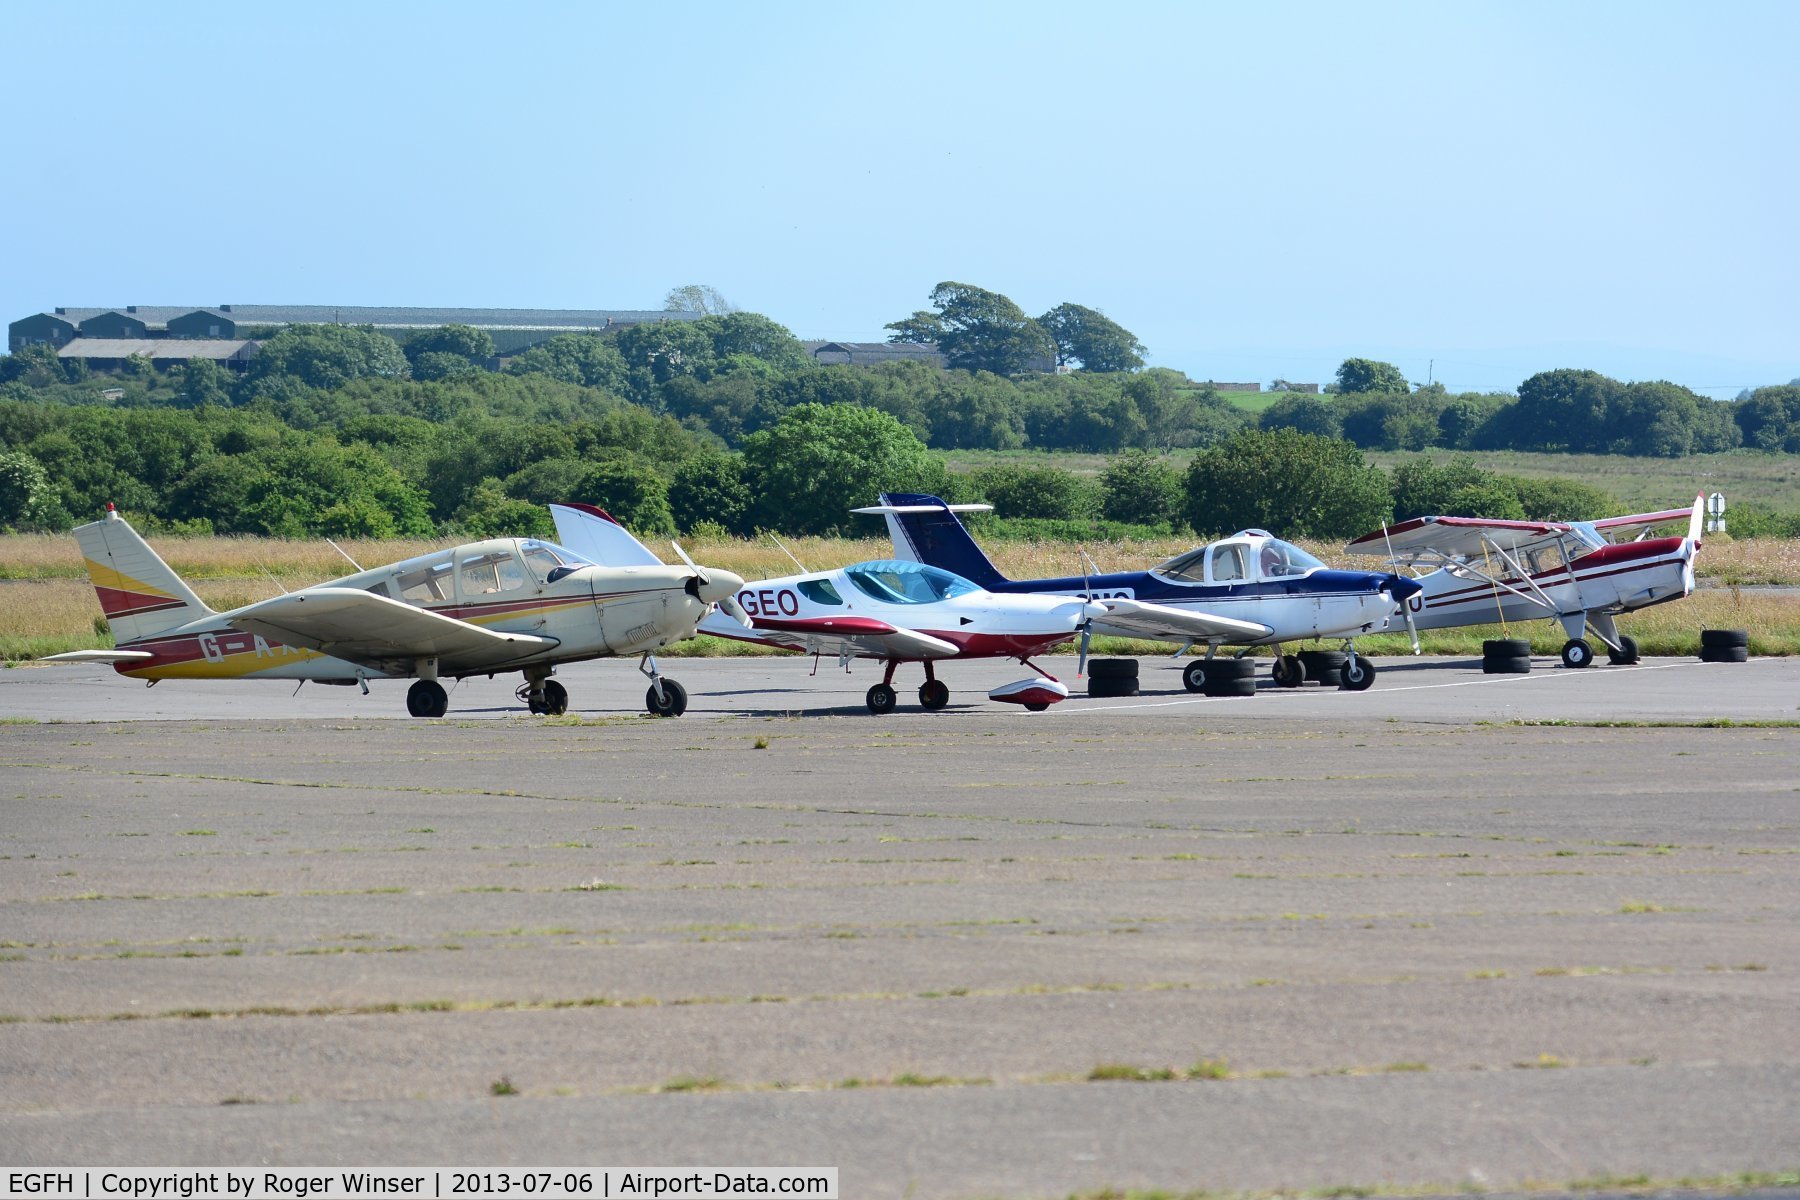 Swansea Airport, Swansea, Wales United Kingdom (EGFH) - Visiting and resident aircraft